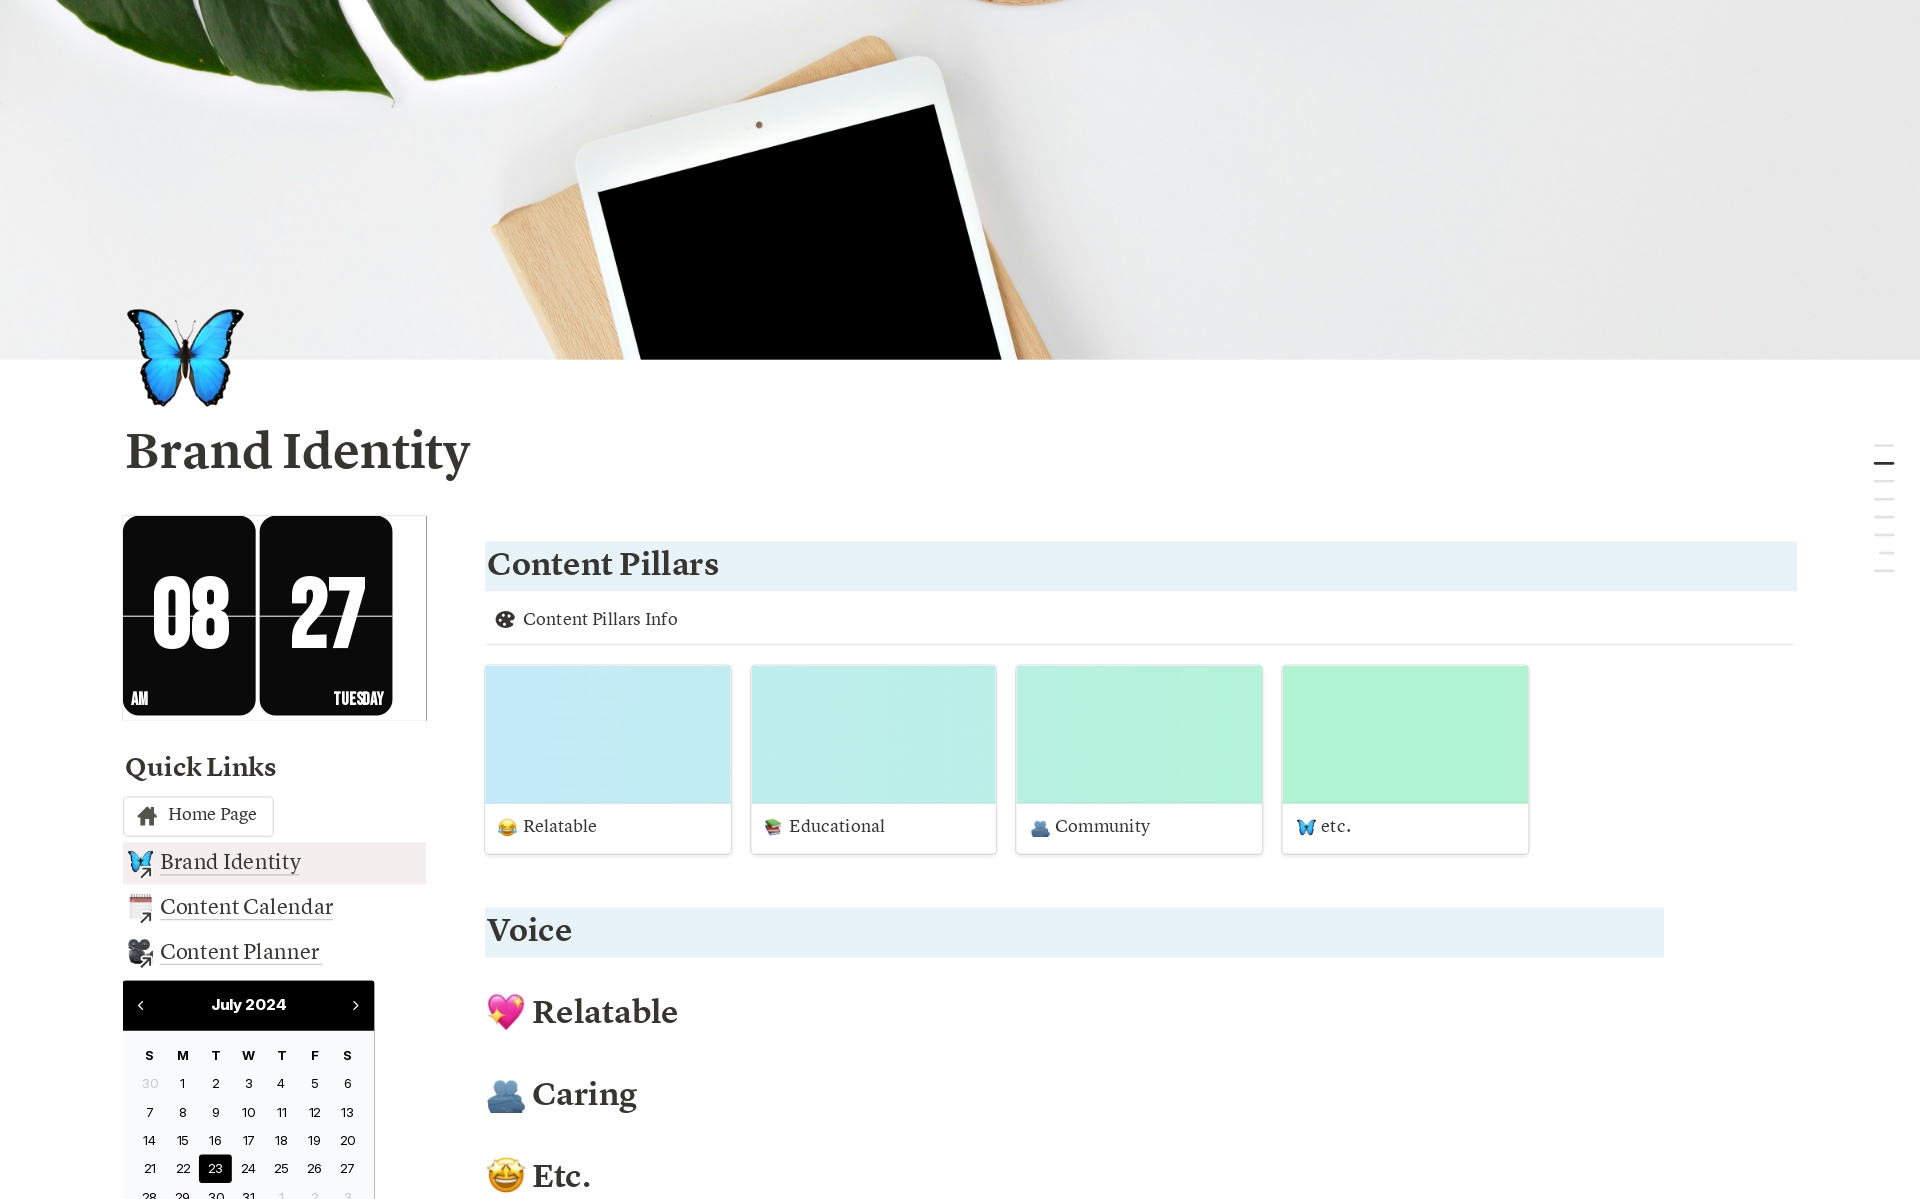 Elevate your content creation with my customizable Notion Template designed for social media managers, small businesses, and content creators. Track video ideas, plan your content calendar, manage brand identity, and streamline your workflow from ideation to publication. 